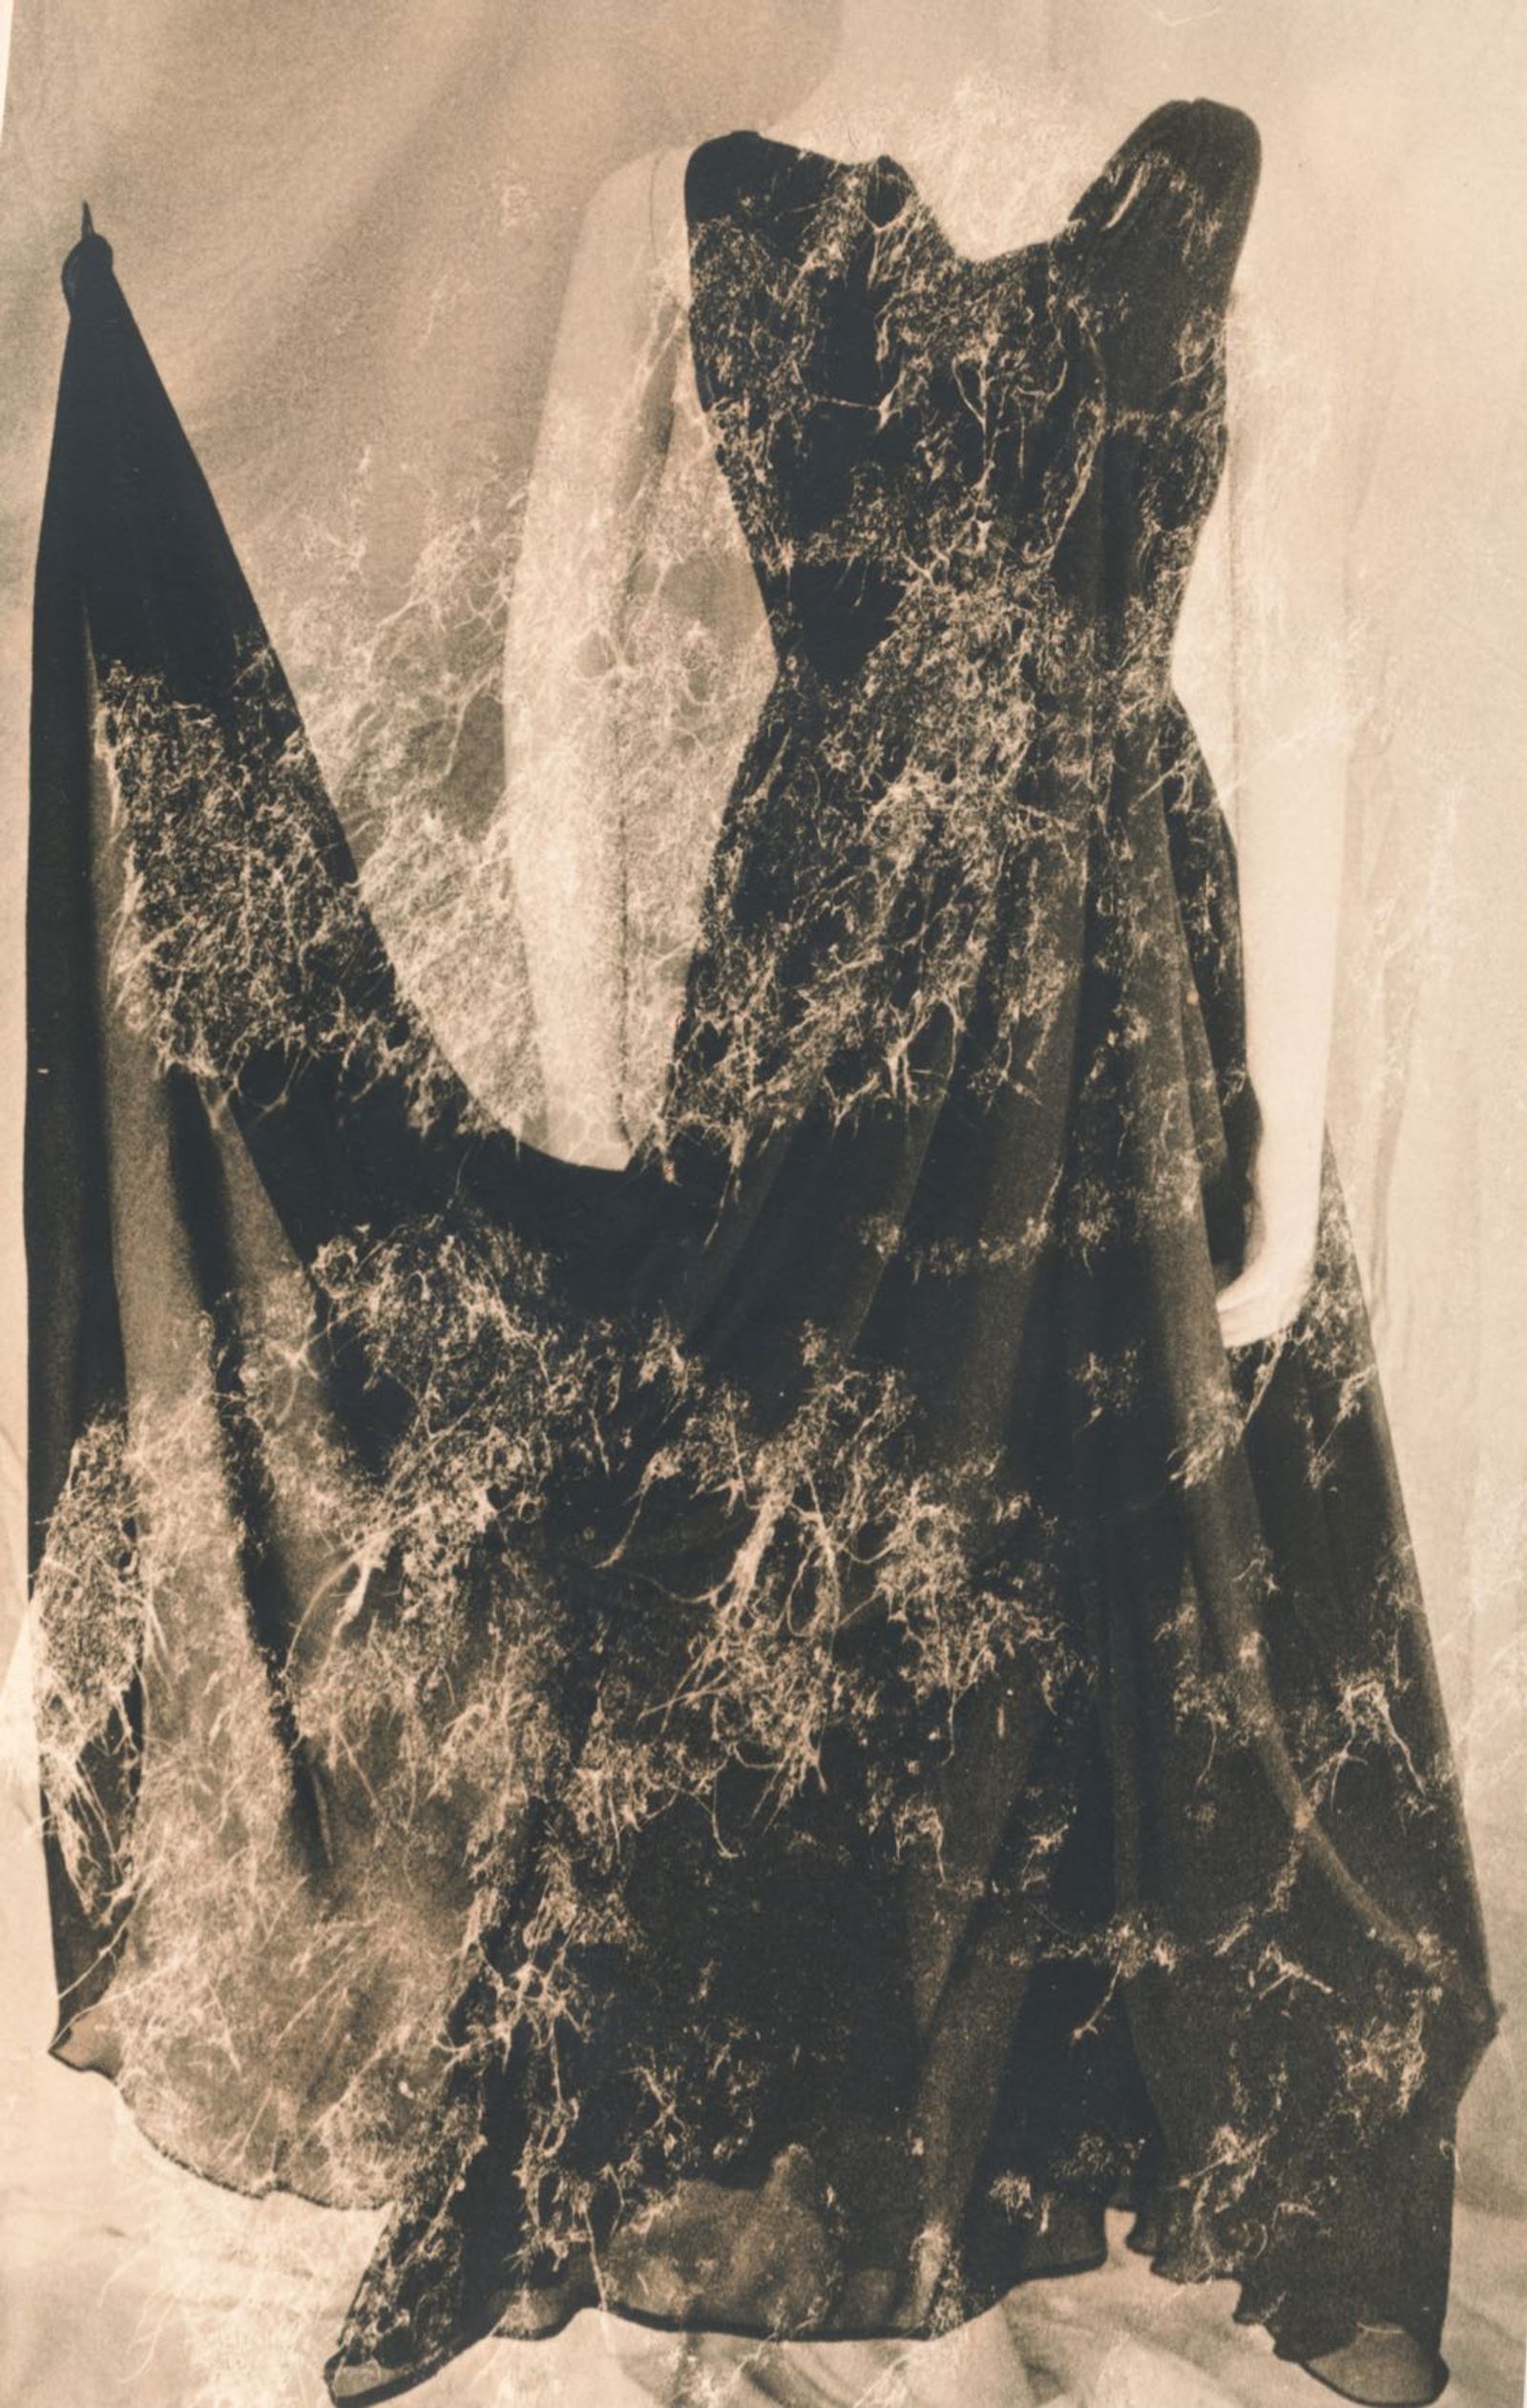 © Jo Stapleton - Evening dress suspended with fishing wire on Mannequin 4 (Lith print with tissue paper photogram)